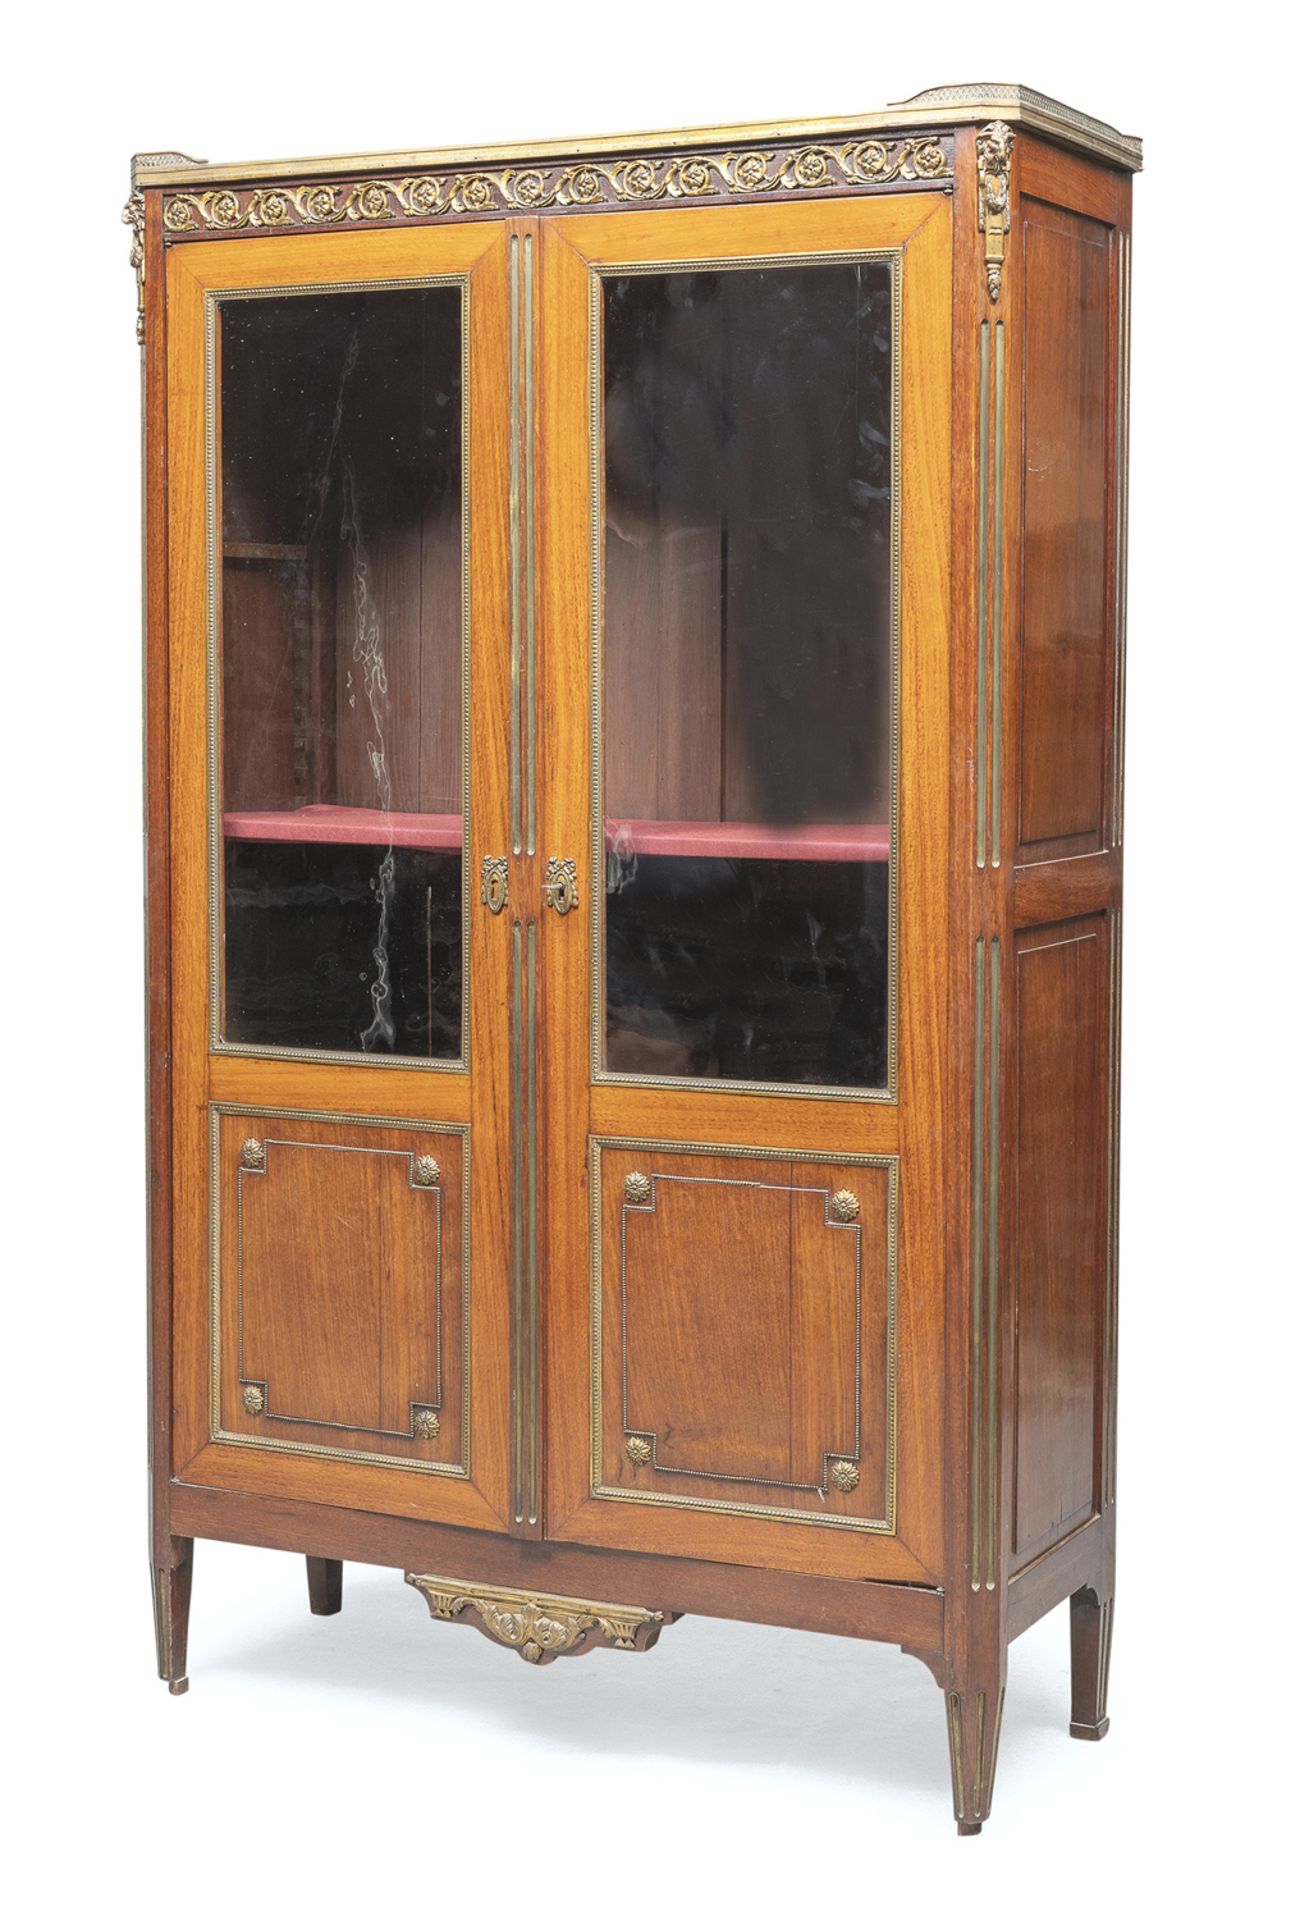 BEAUTIFUL MAHOGANY GLASS DOOR CABINET FRANCE END OF THE LOUIS XVI PERIOD